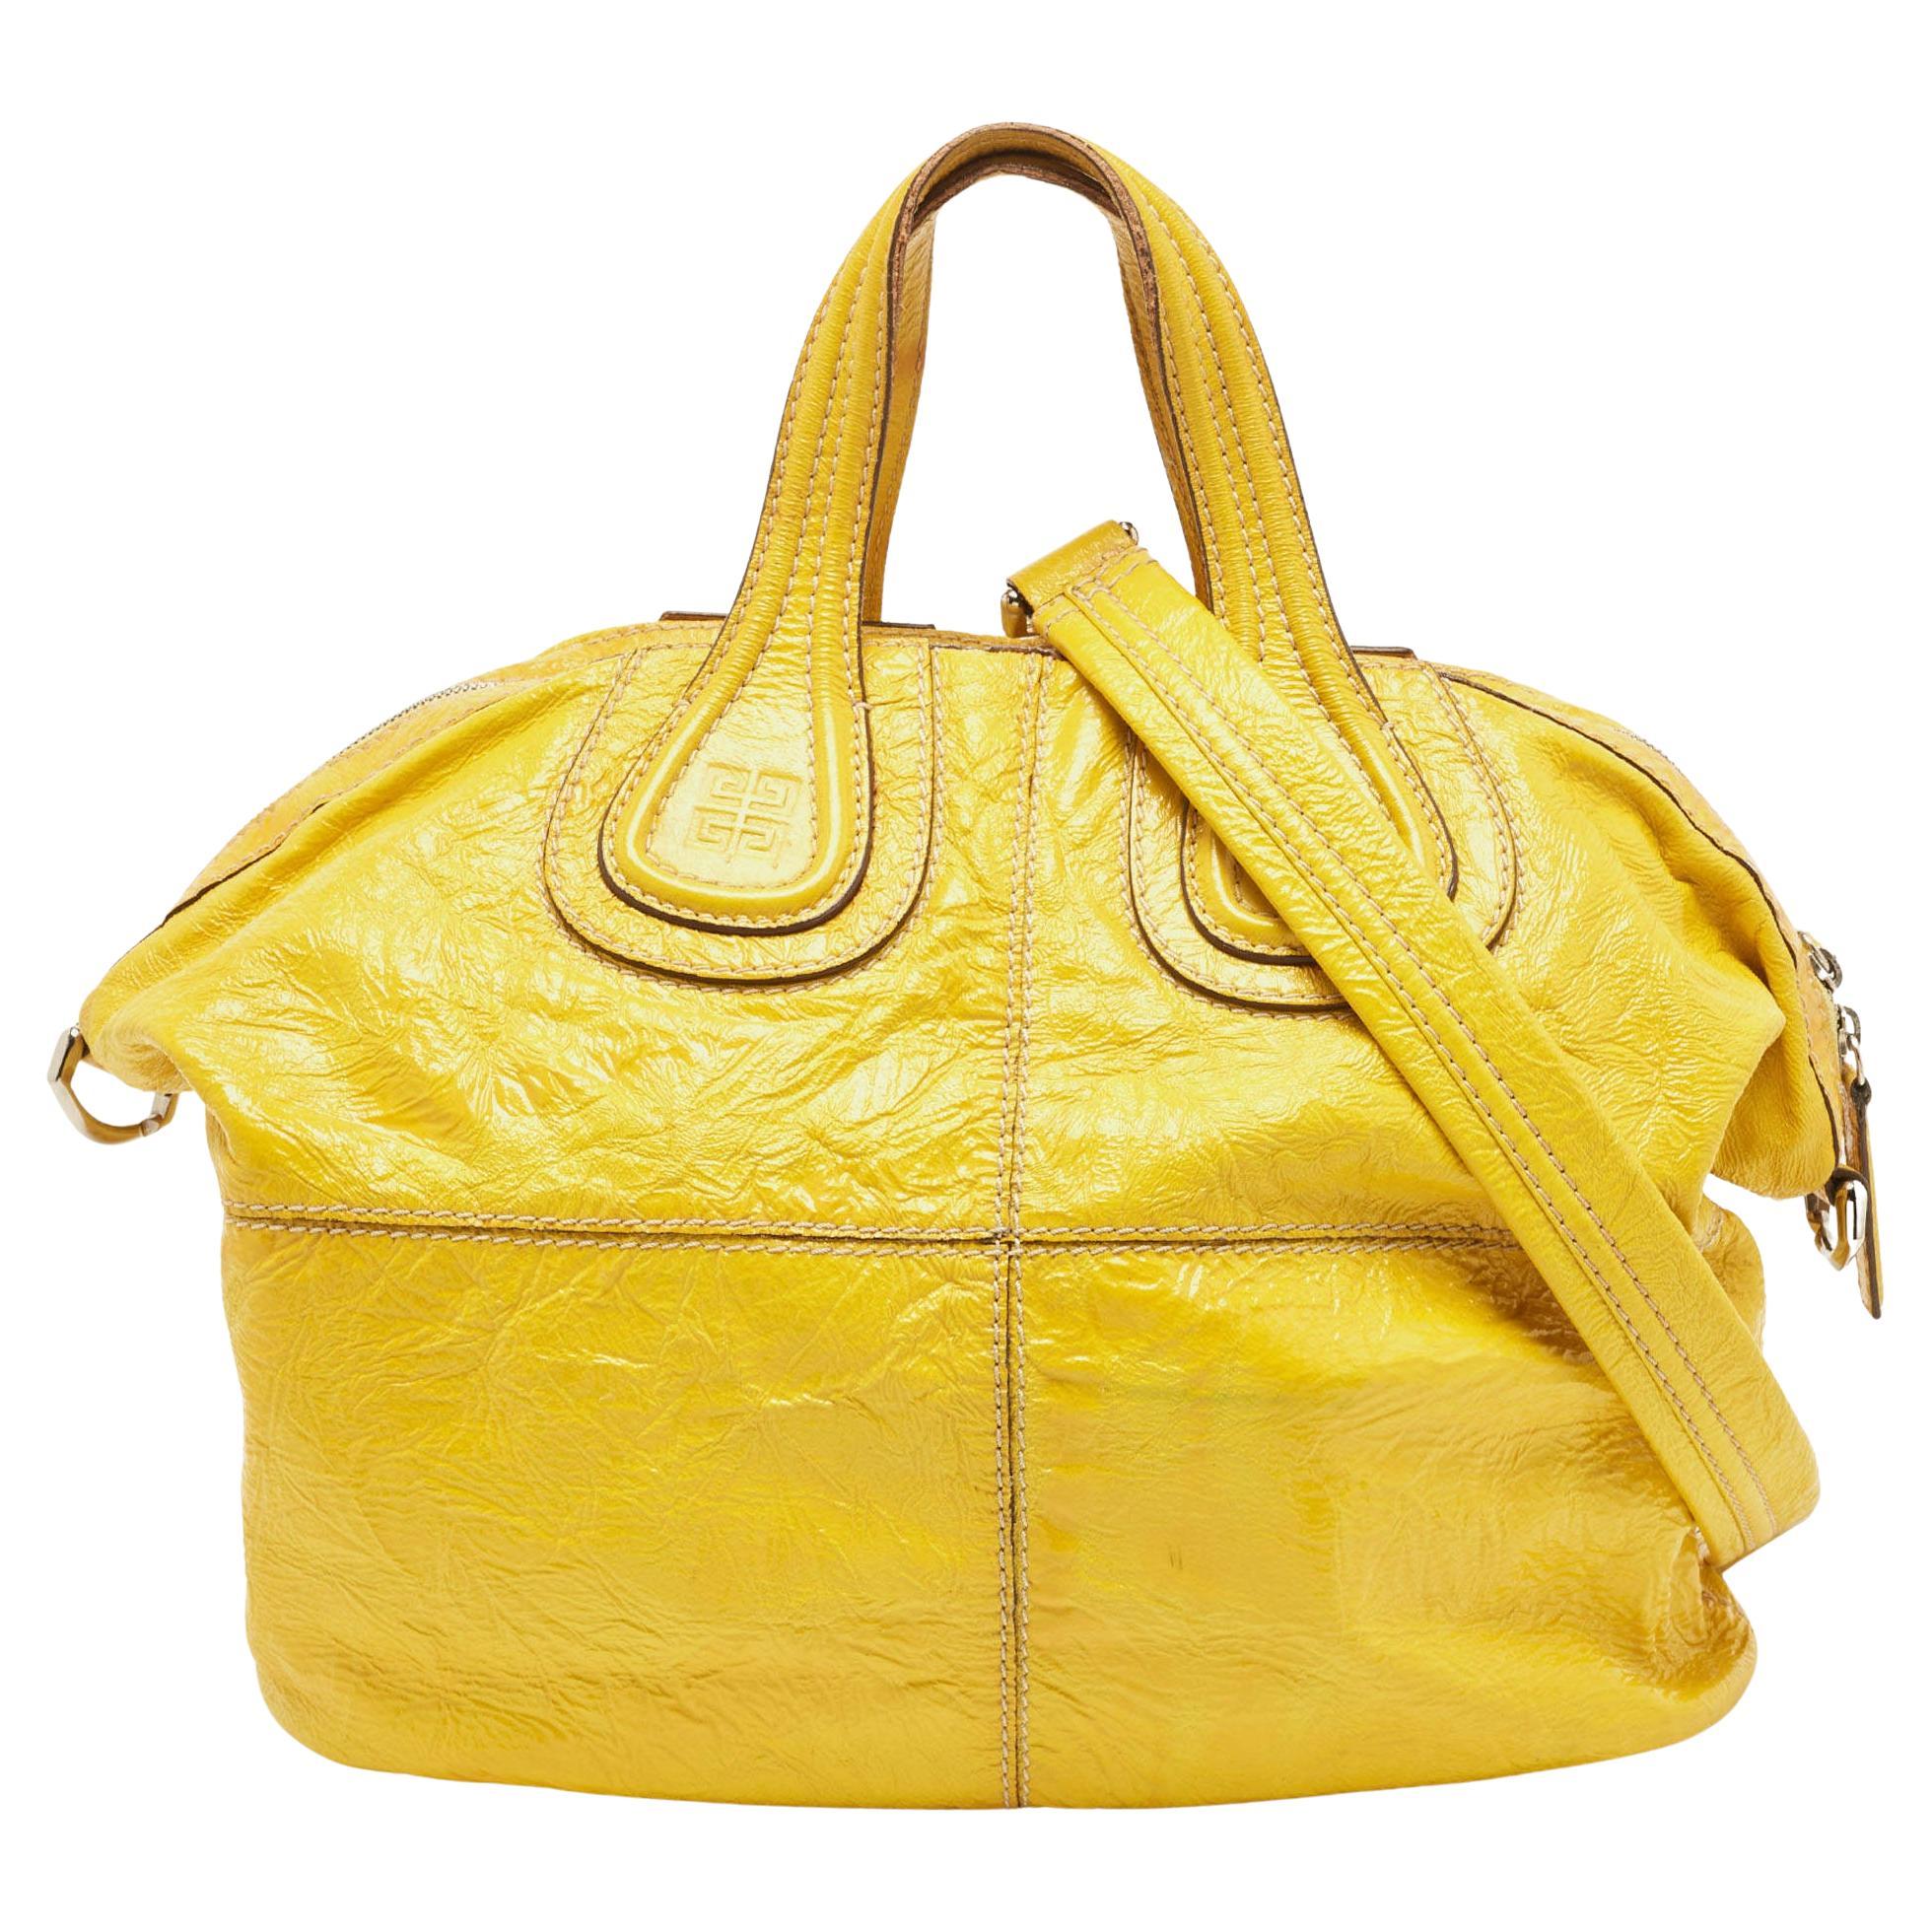 Givenchy Yellow Patent Leather Nightingale Satchel